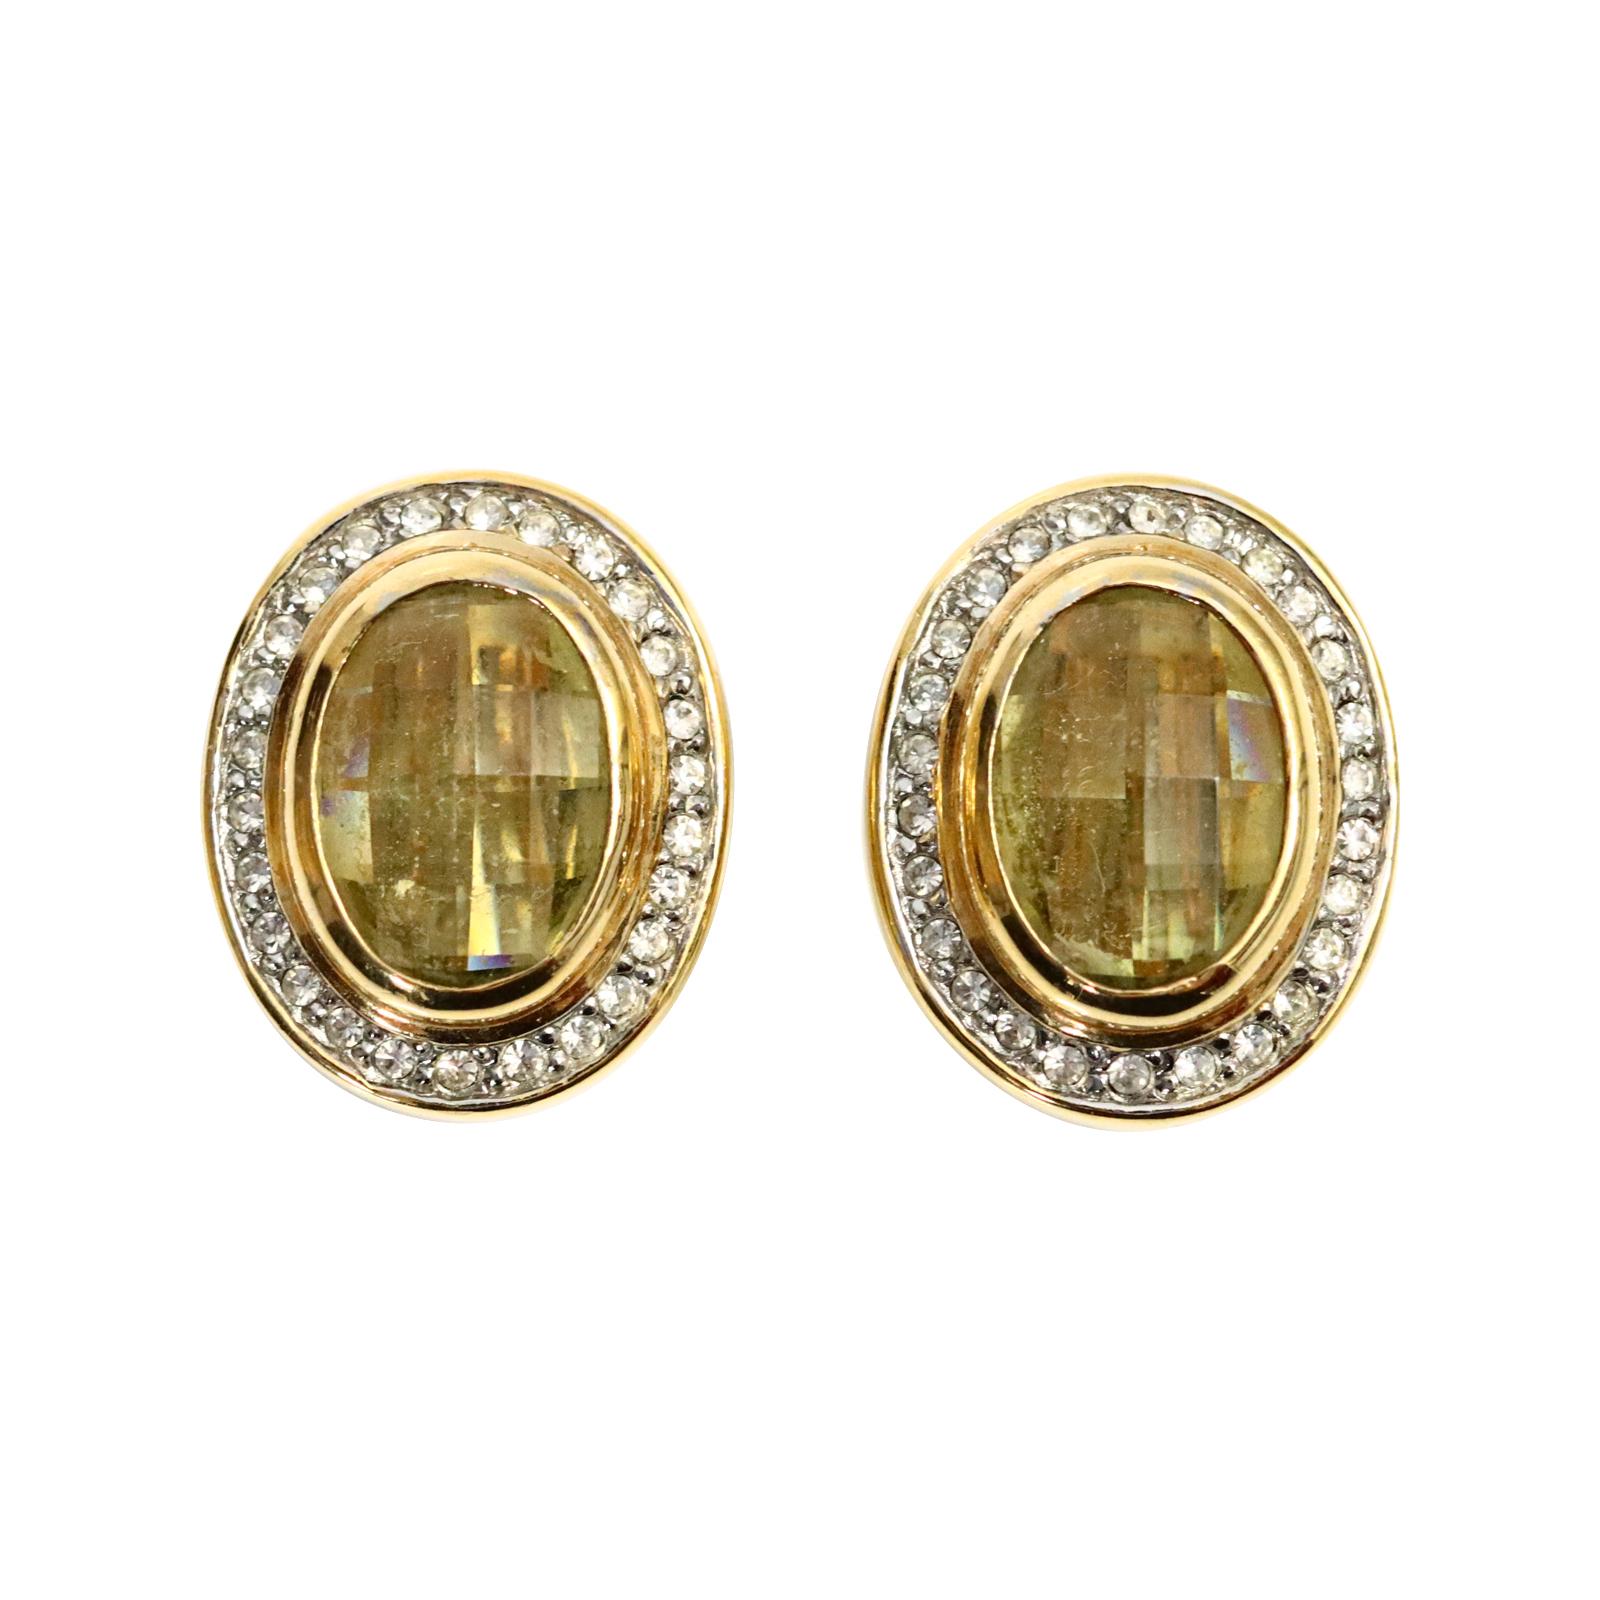 Vintage Gold Tone Citrine and Diamante Earrings Circa 1980's. These are well made and substantial earrings They have a layered effect as the diamante is surrounded by the gold as well as the citrine for a well made earring and a beautiful look.